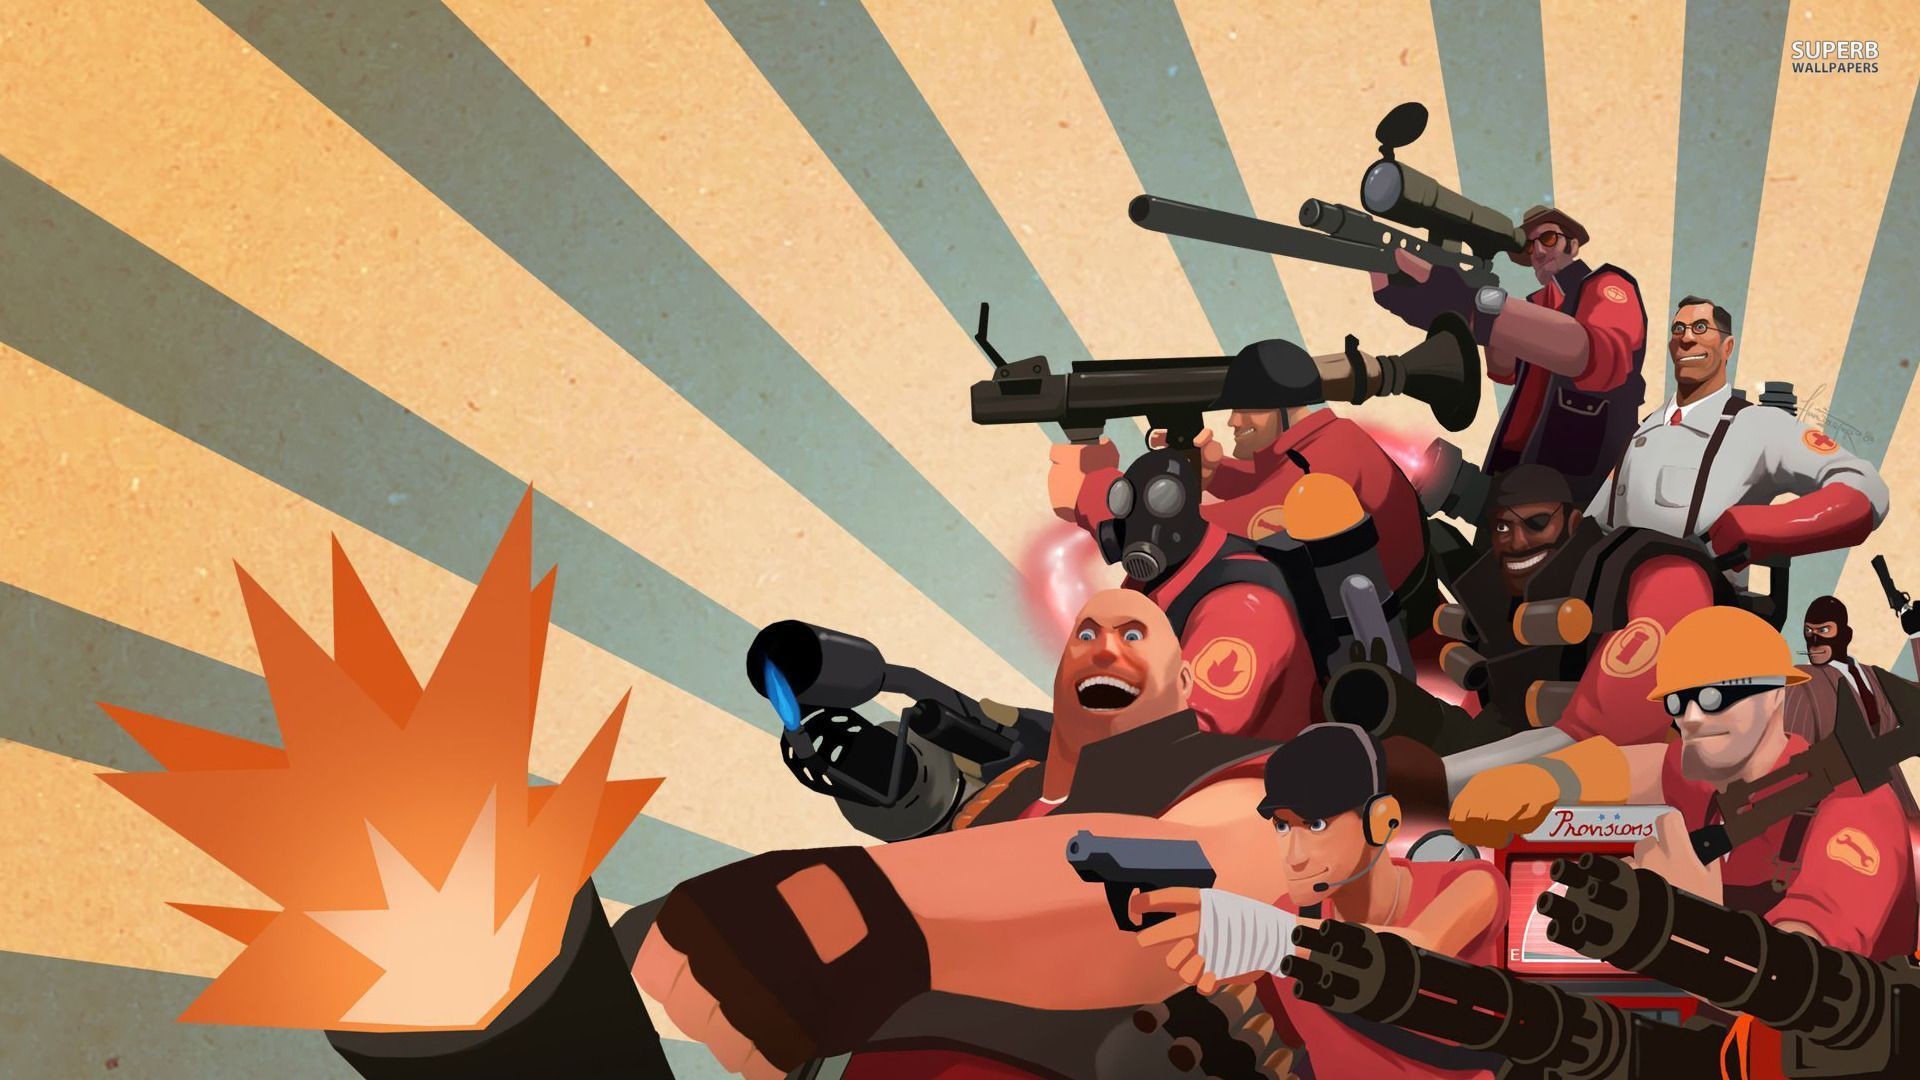 1920x1080 Team Fortress 2 Wallpapers High Quality